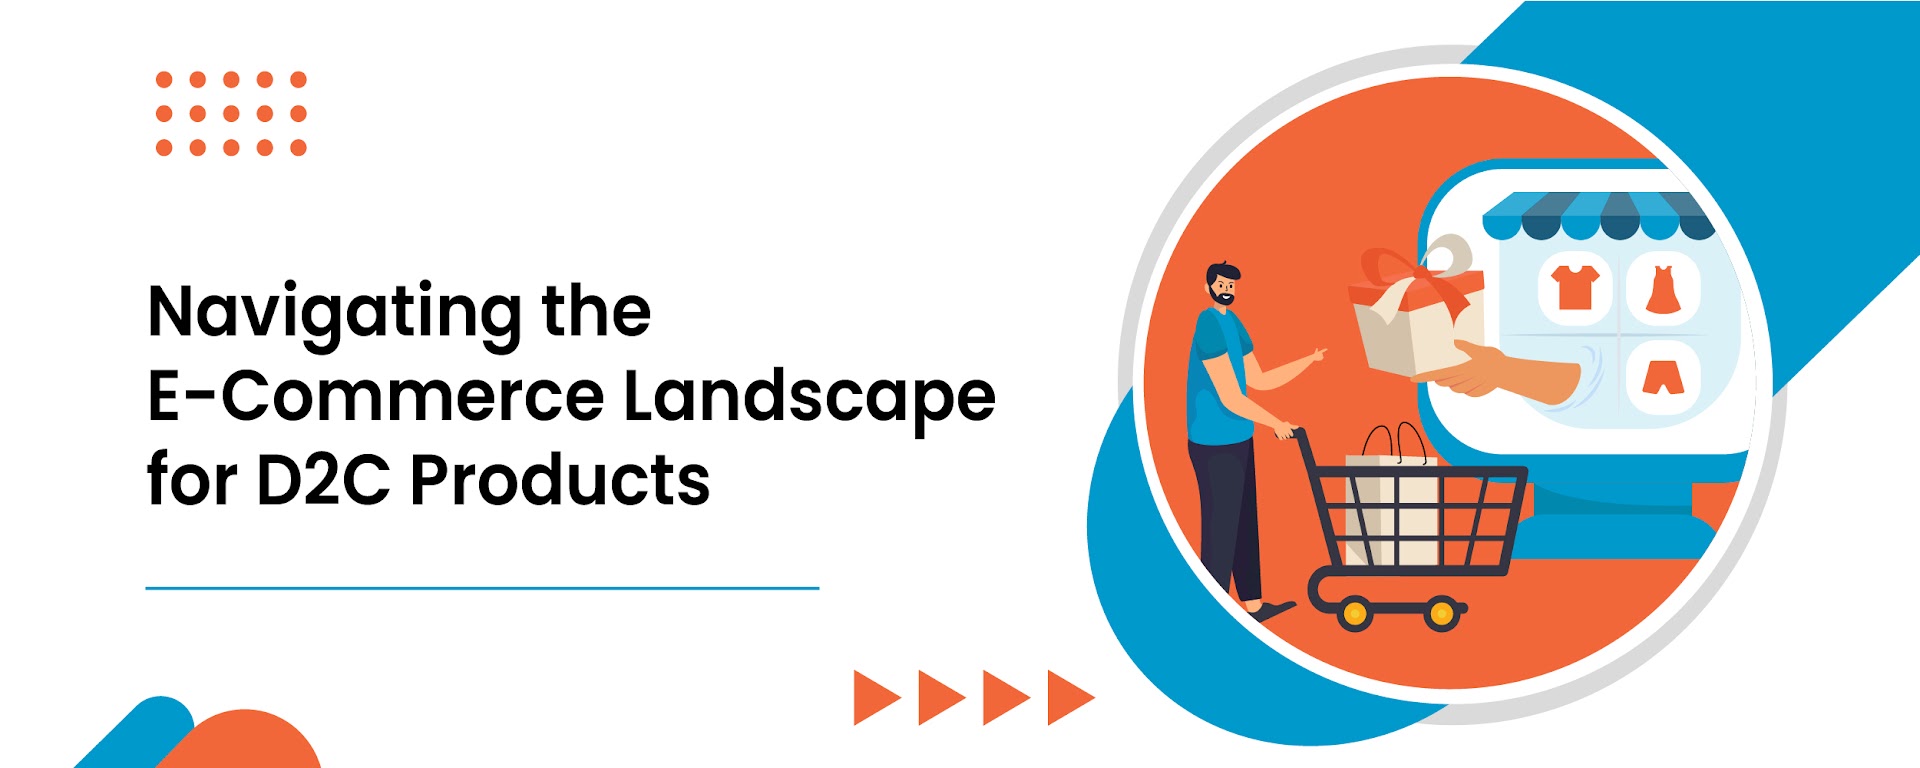 Navigating the E-Commerce Landscape for D2C Products